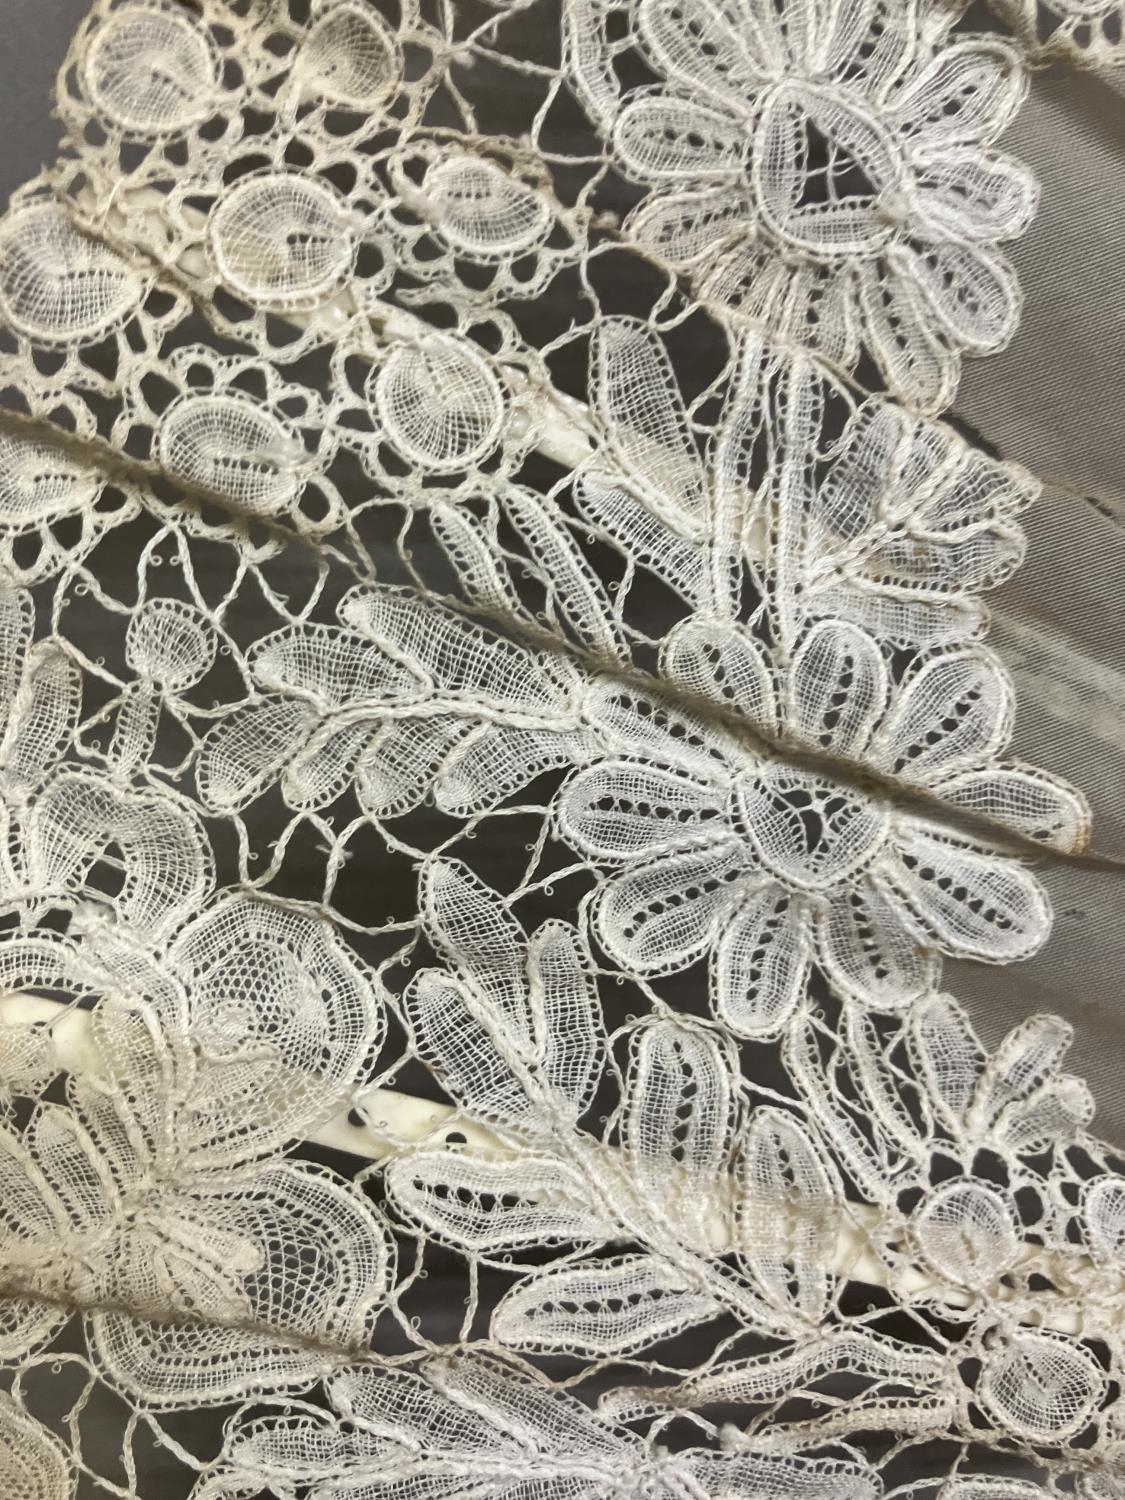 A good Brussels lace fan, mounted on mother of pearl, burgau, including the ribs, the leaf most - Image 13 of 13